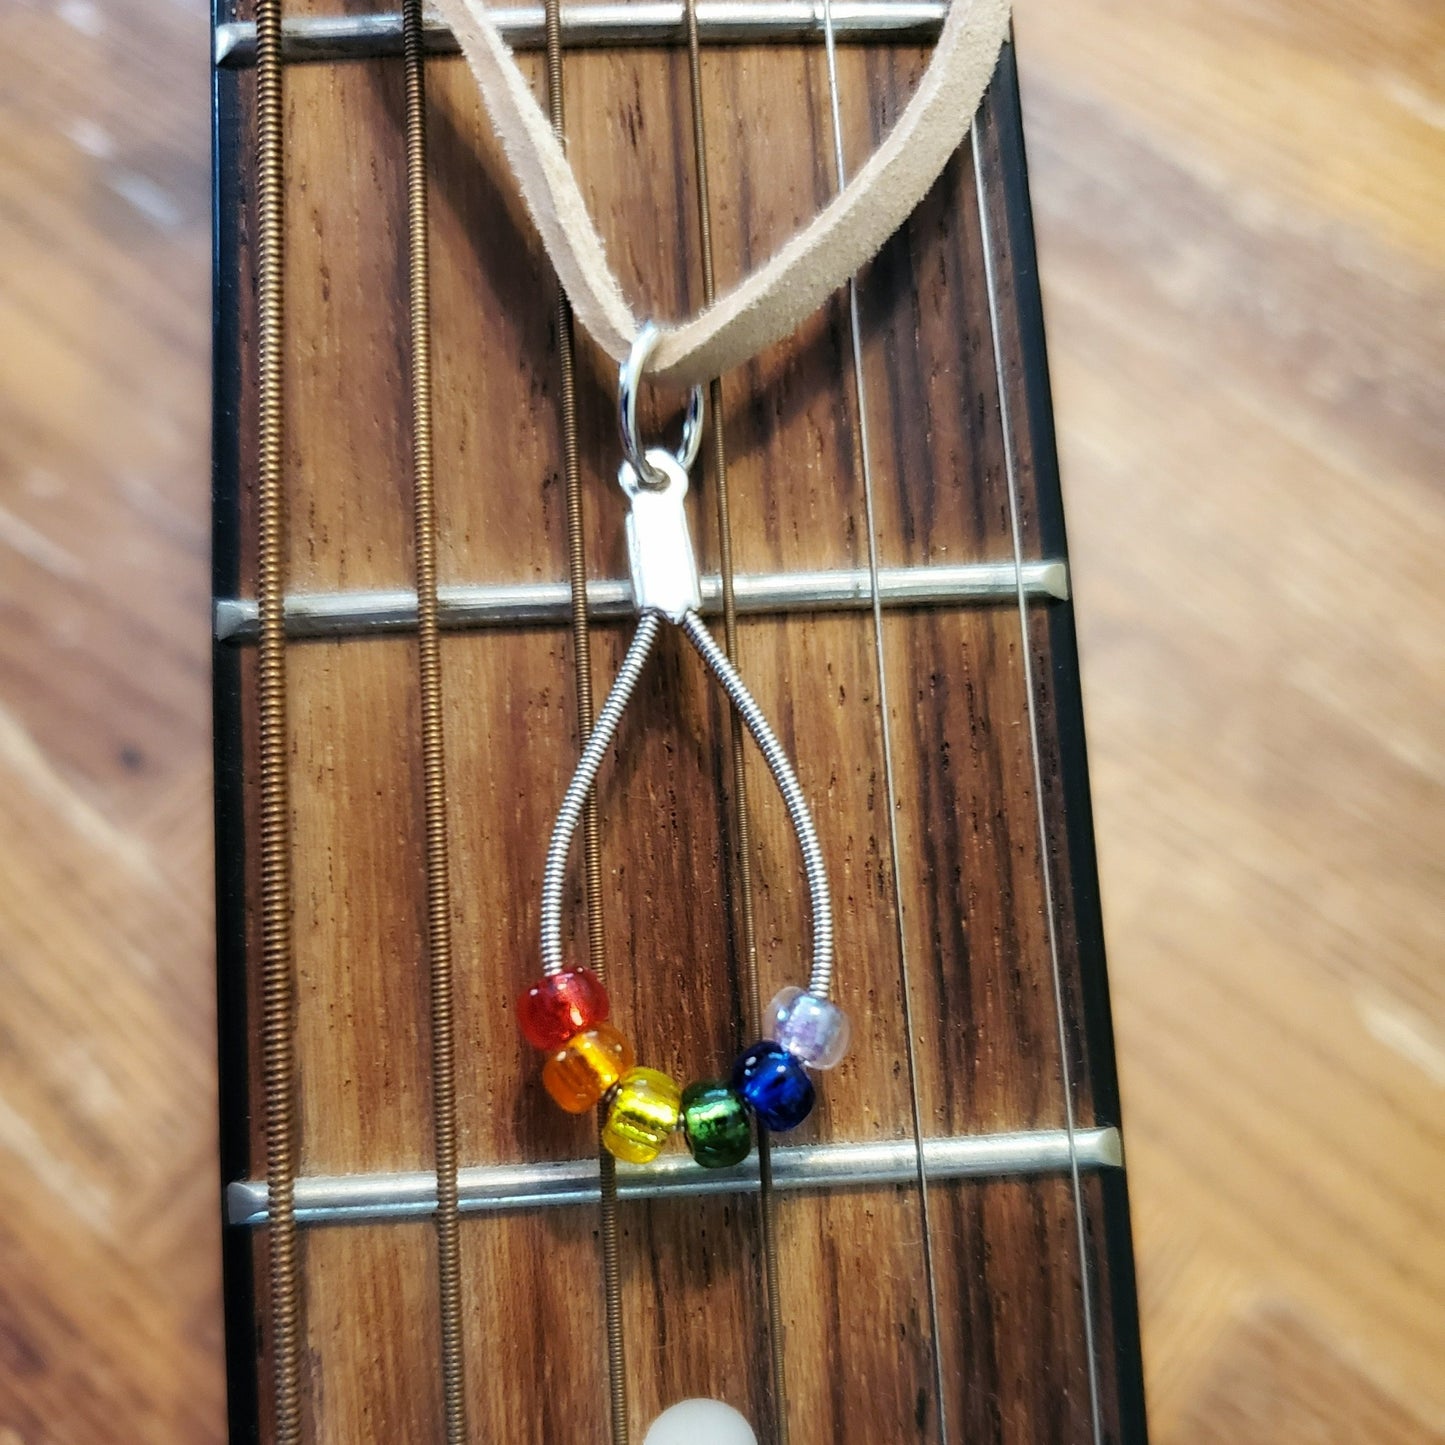 necklace made from an upcycled guitar string - 6 glass beads represent the colours of the LGBTQ flag (red, orange, yellow, green, blue and purple) and a beige suede cord on the neck of a beige guitar